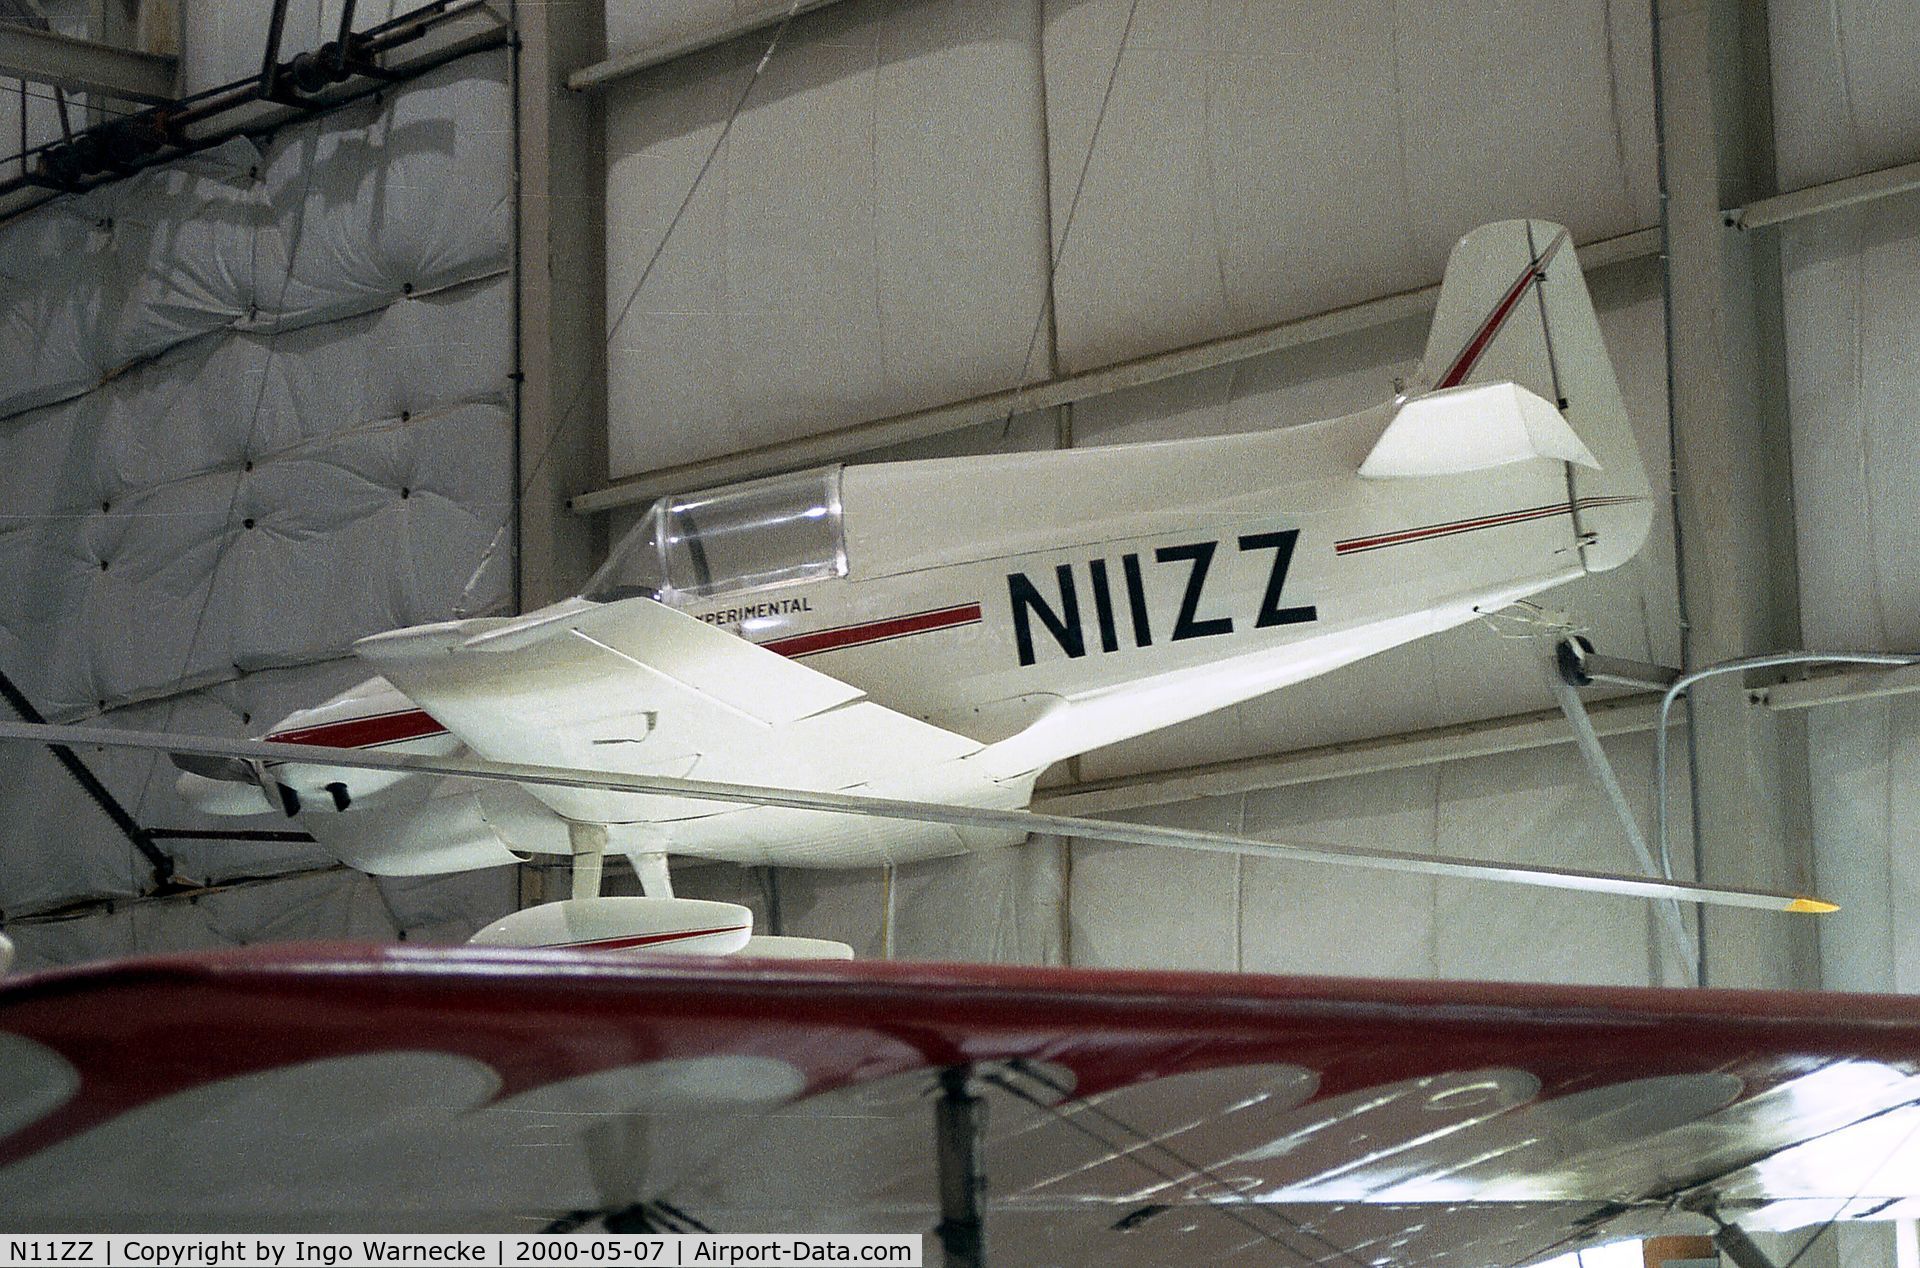 N11ZZ, 1970 Nicks Special LR-1A C/N 11, Nicks Special LR-1A at the New England Air Museum, Windsor Locks CT